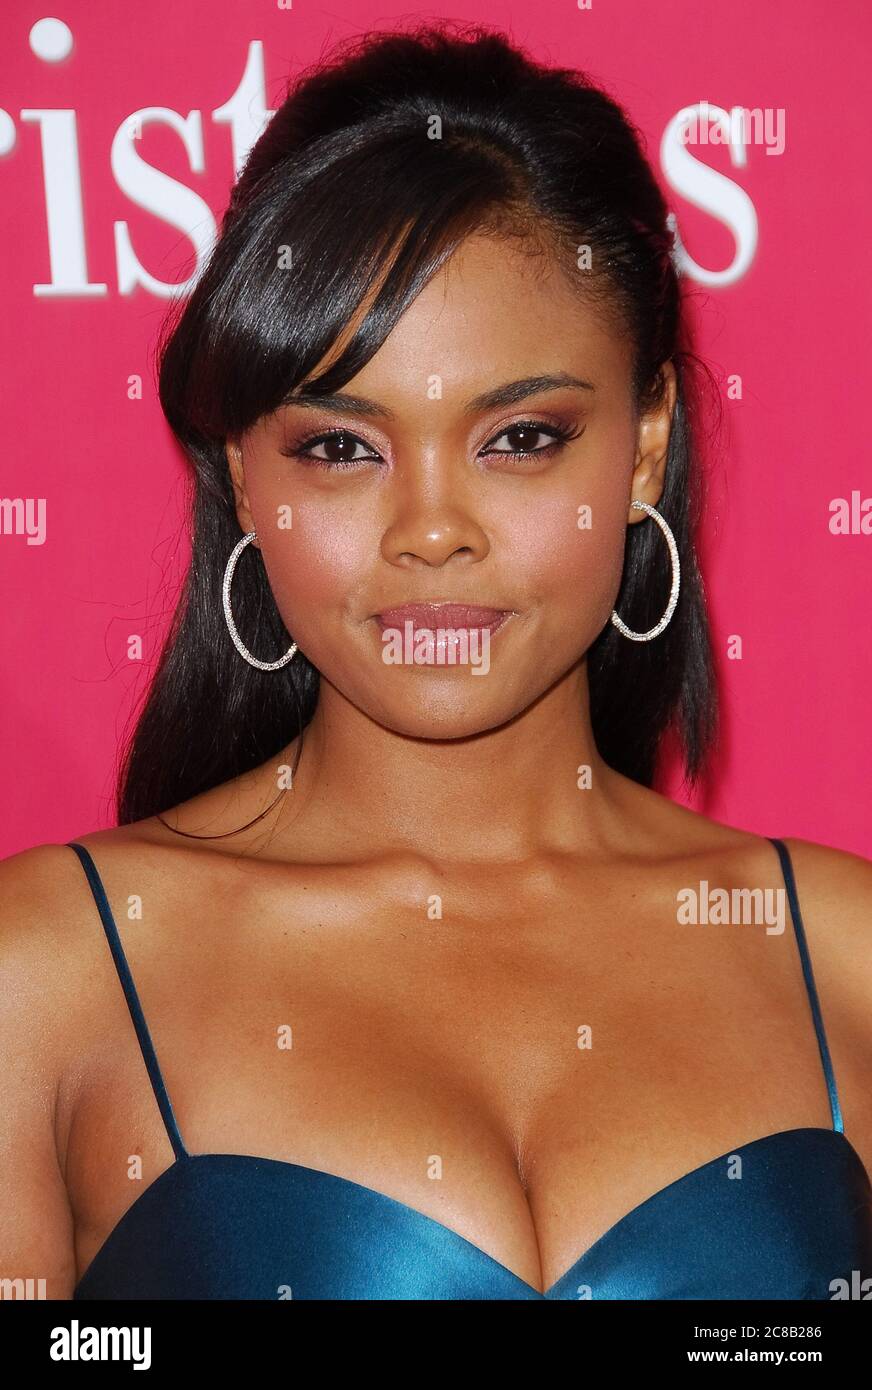 Sharon Leal at the World Premiere of 'This Christmas' held at the Cinerama Dome in Hollywood, CA. The event took place on Monday, November 12, 2007. Photo by: SBM / PictureLux - File Reference # 34006-10326SBMPLX Stock Photo